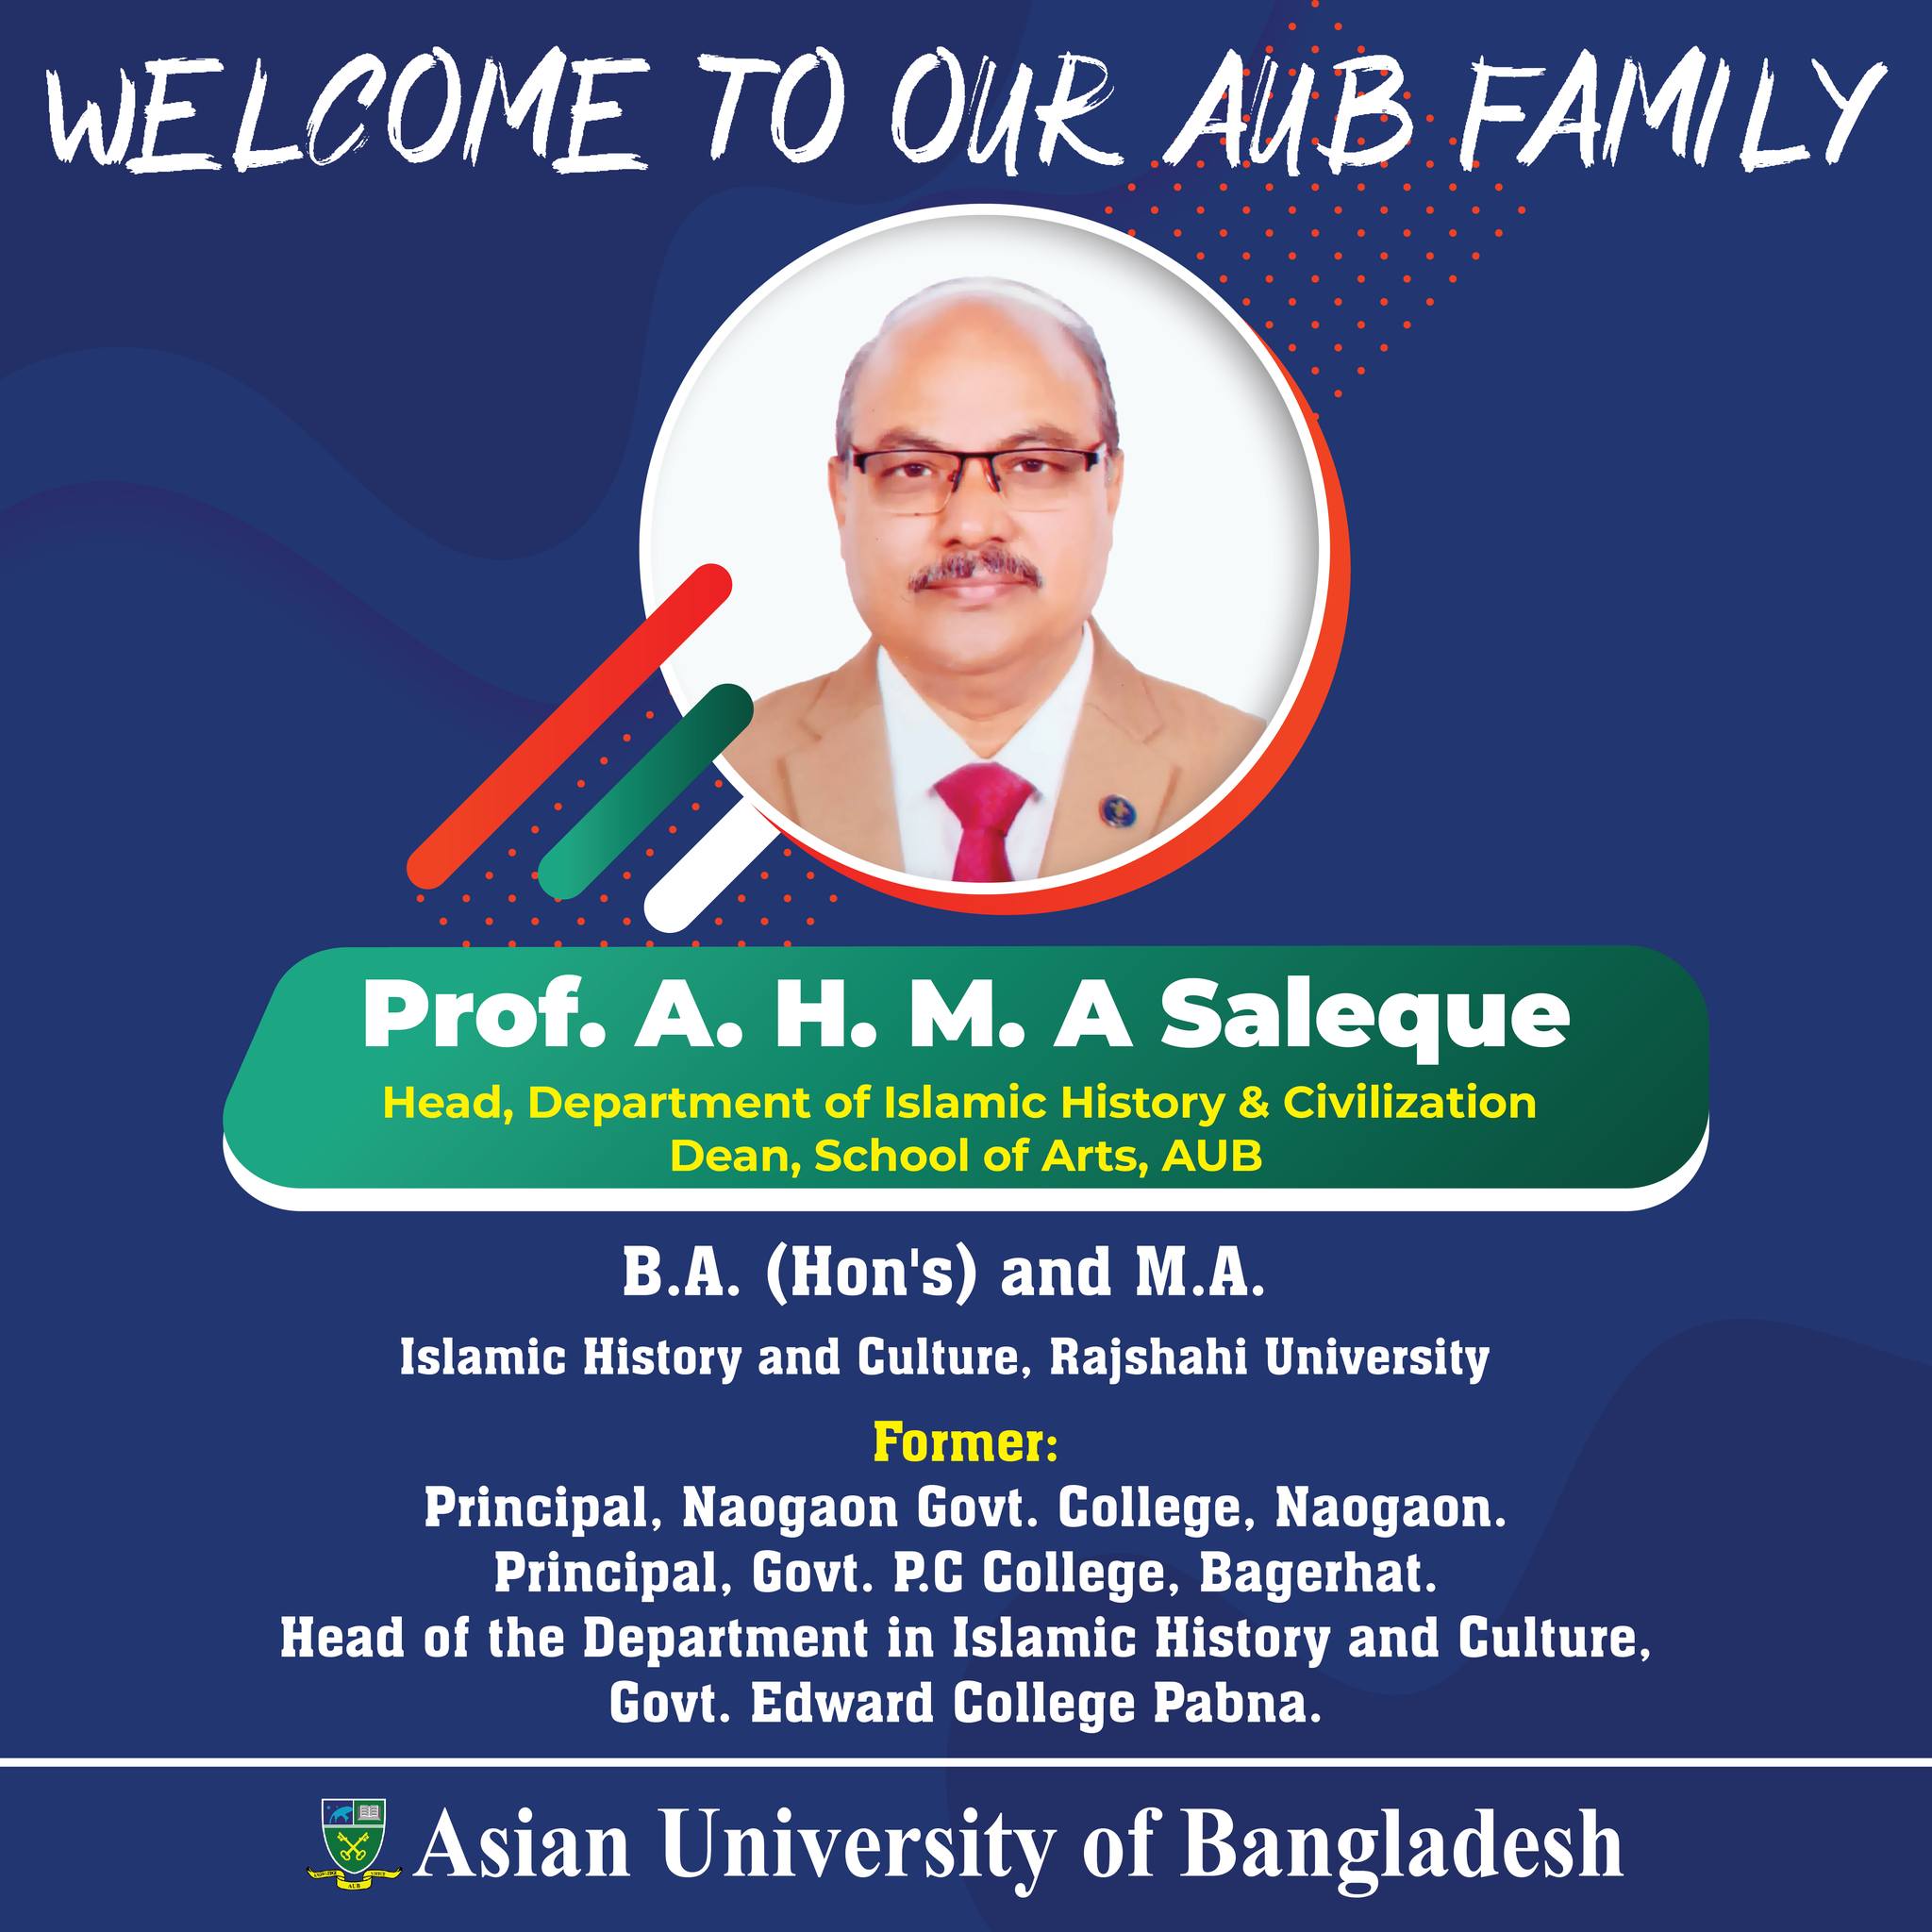 Welcome to our AUB family